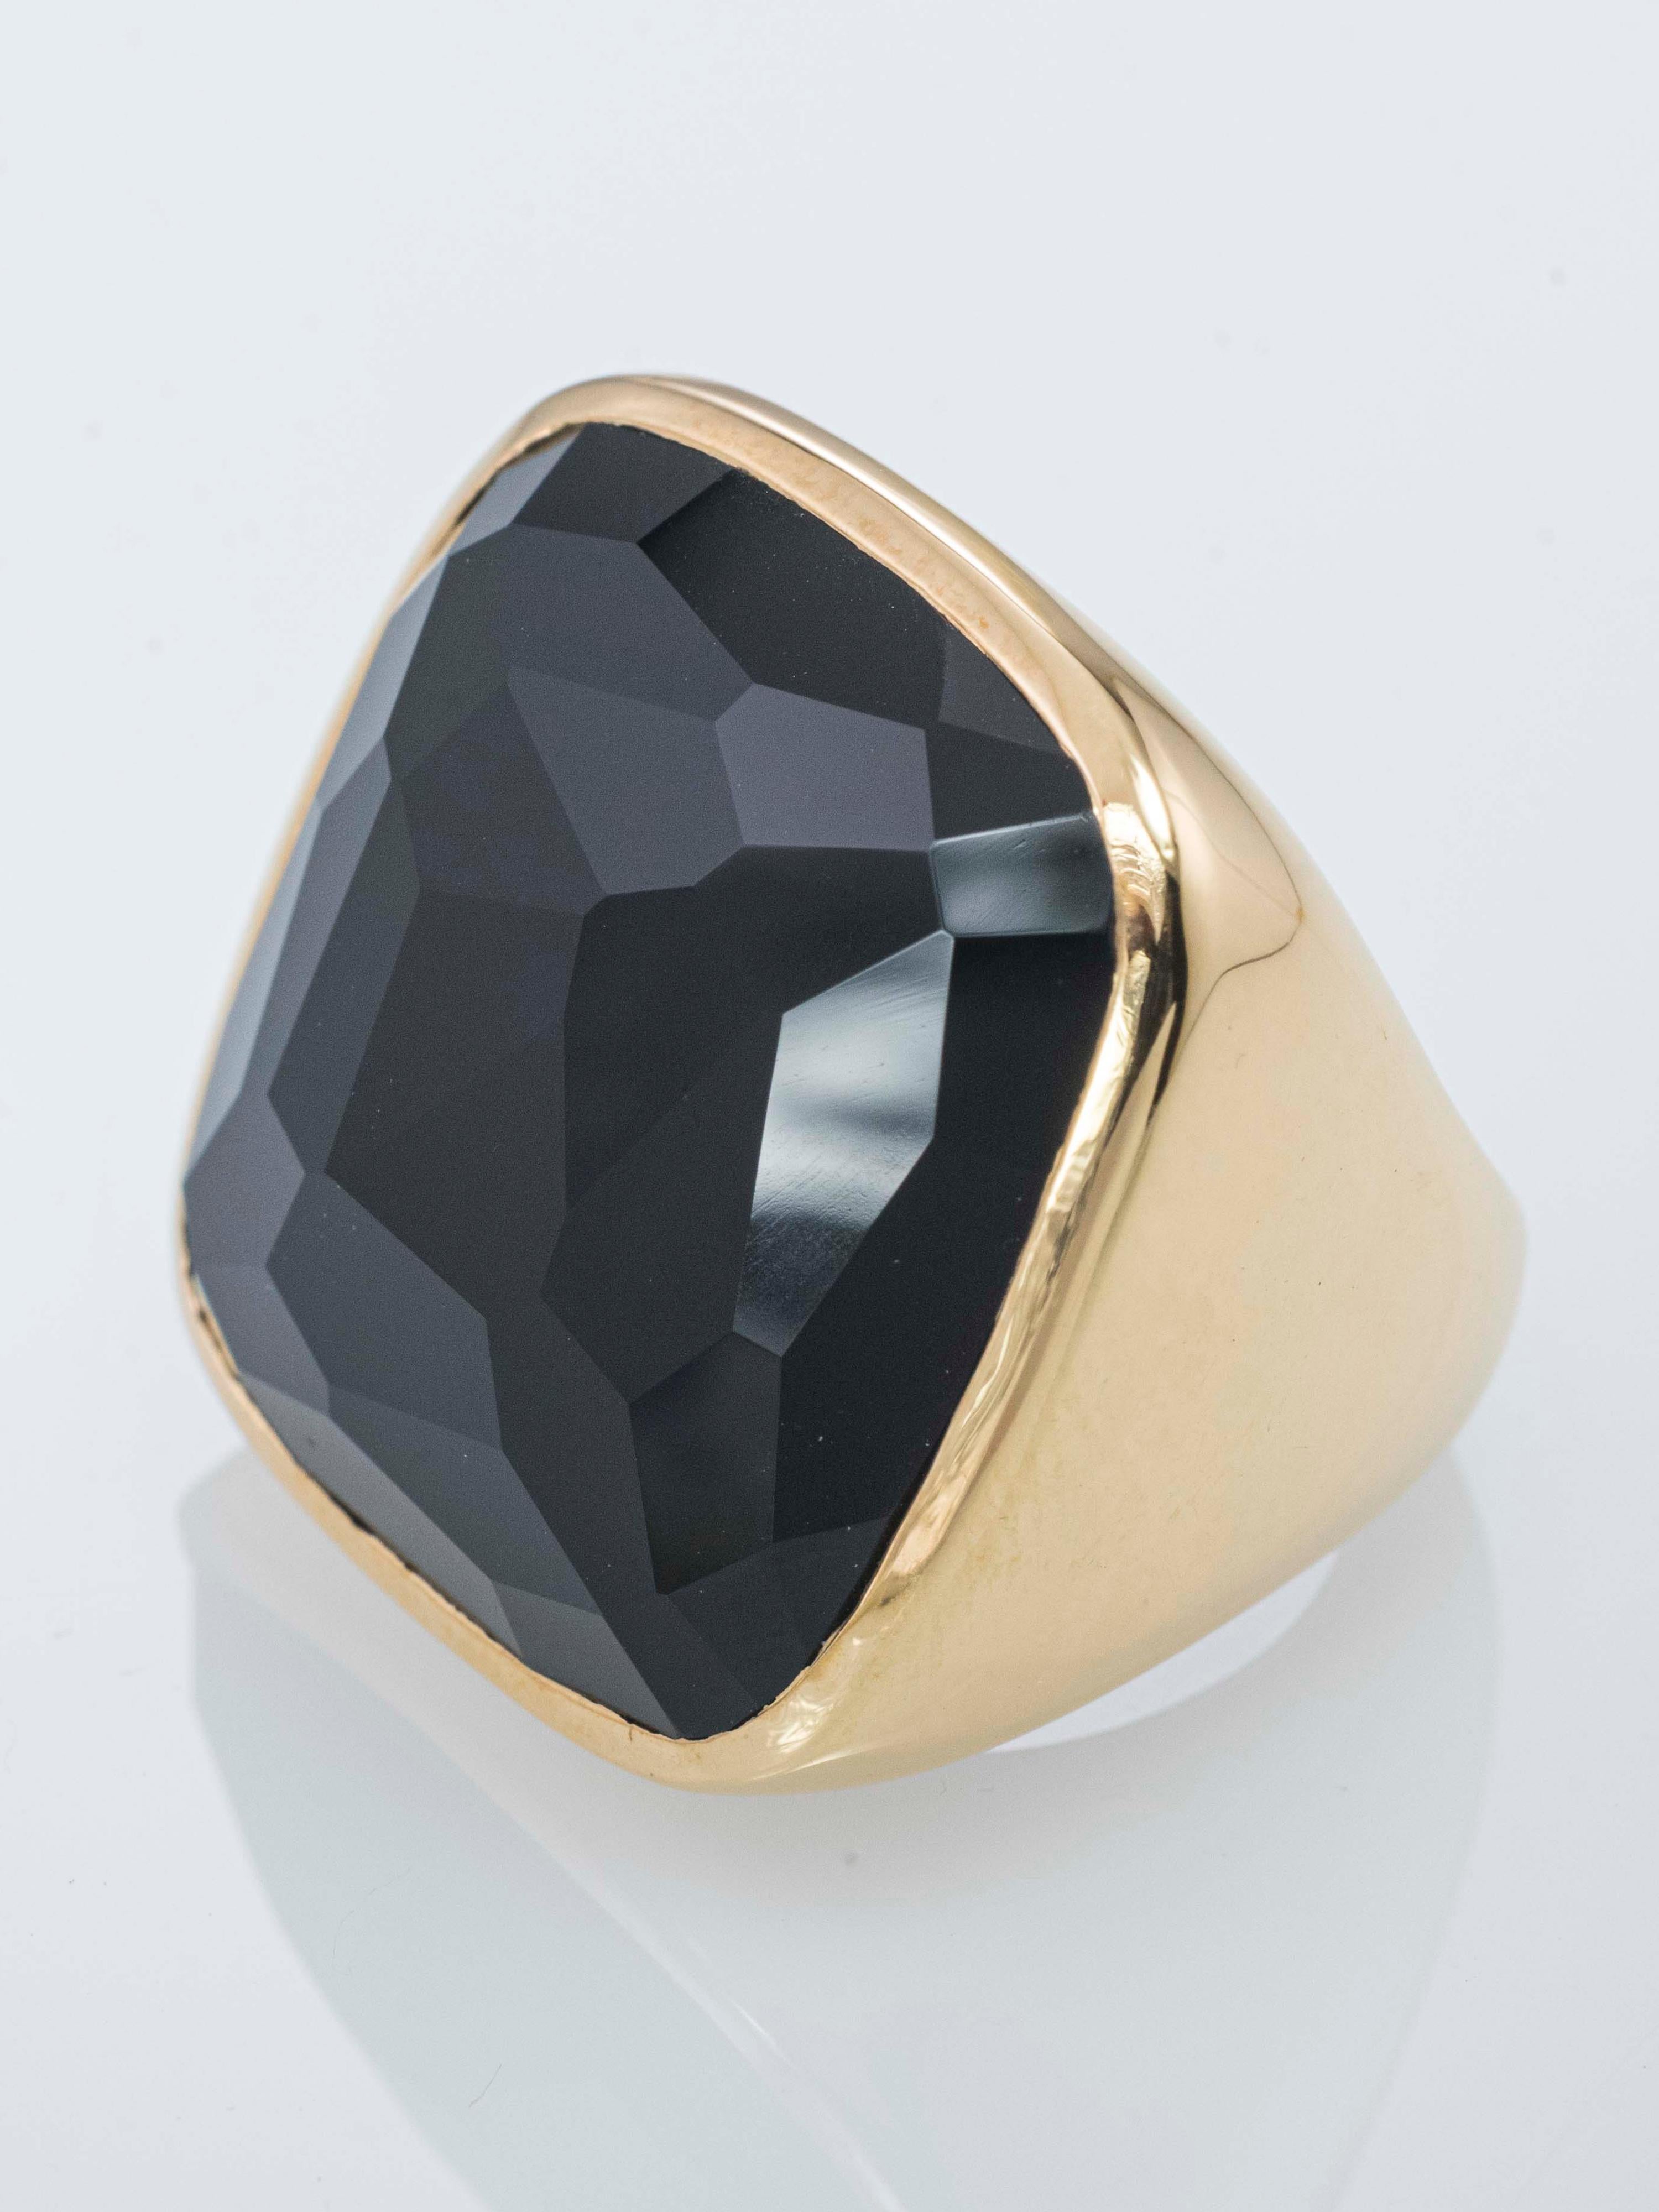 18 Kt rose gold cocktail ring with a geometric shape .
It's ergonomic design makes it very easy and comfortable to wear despite of it's big dimension.
The central Onyx measures cm 2.50x2.50 and weighs ct 27.38.
18 Kt gold weigh gr. 26.20

Made in